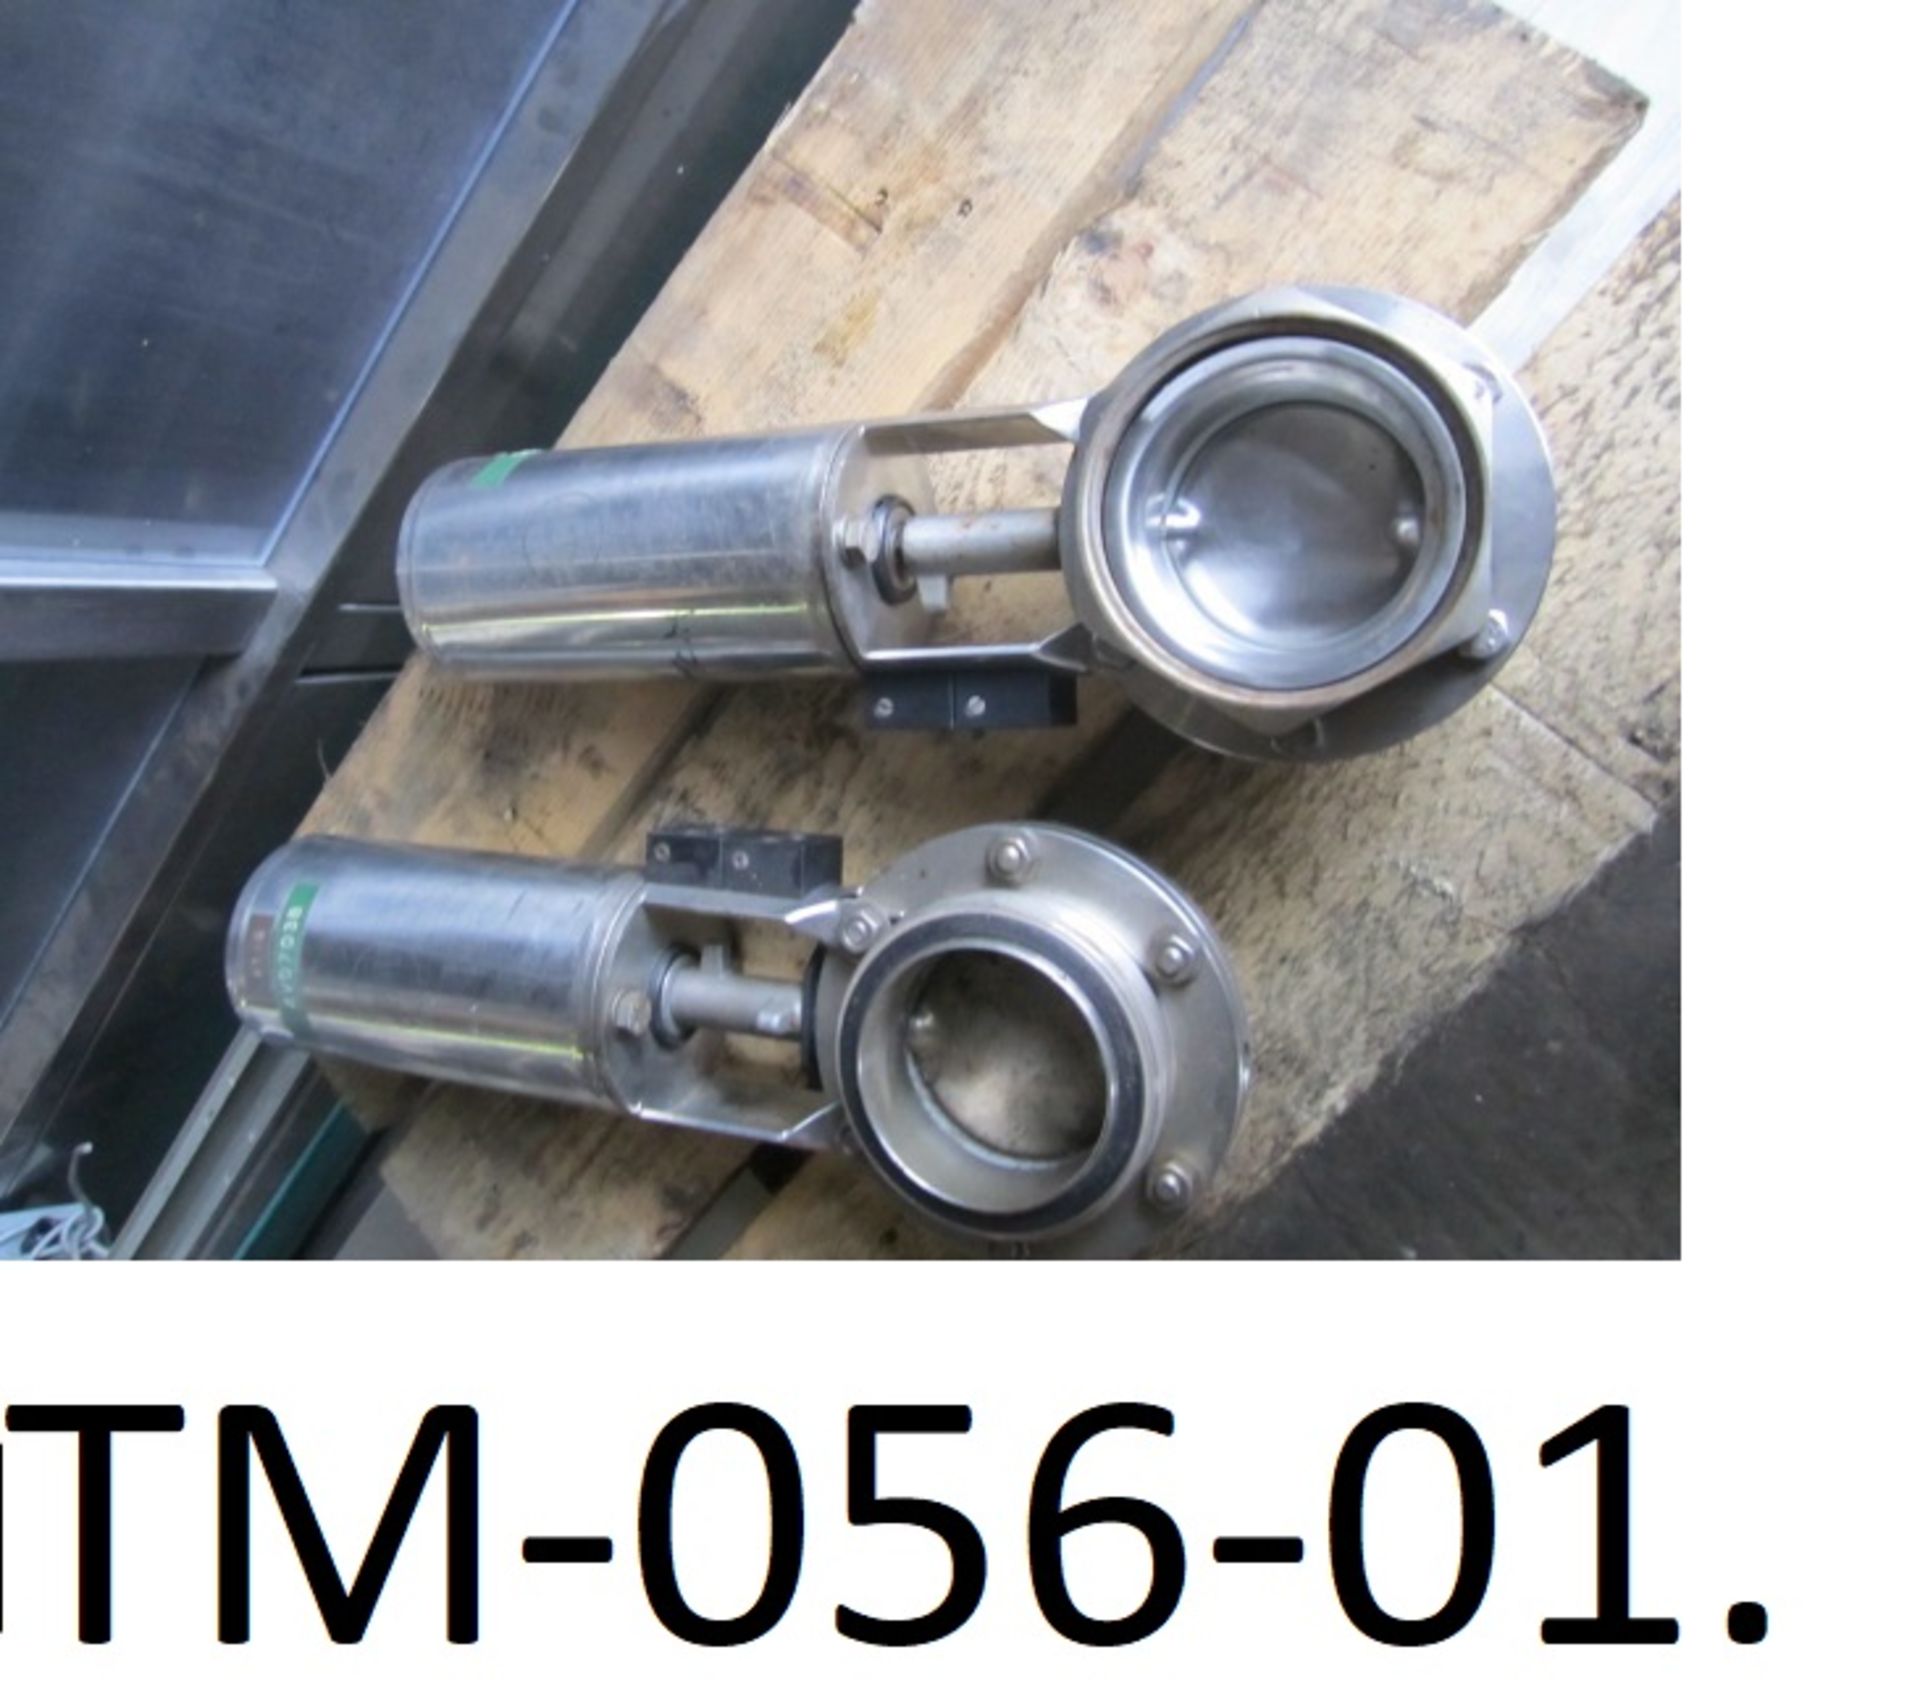 Stainless Steel Butterfly Valves (tested), with stainless steel actuators (Ex Food), free loading - Image 2 of 4